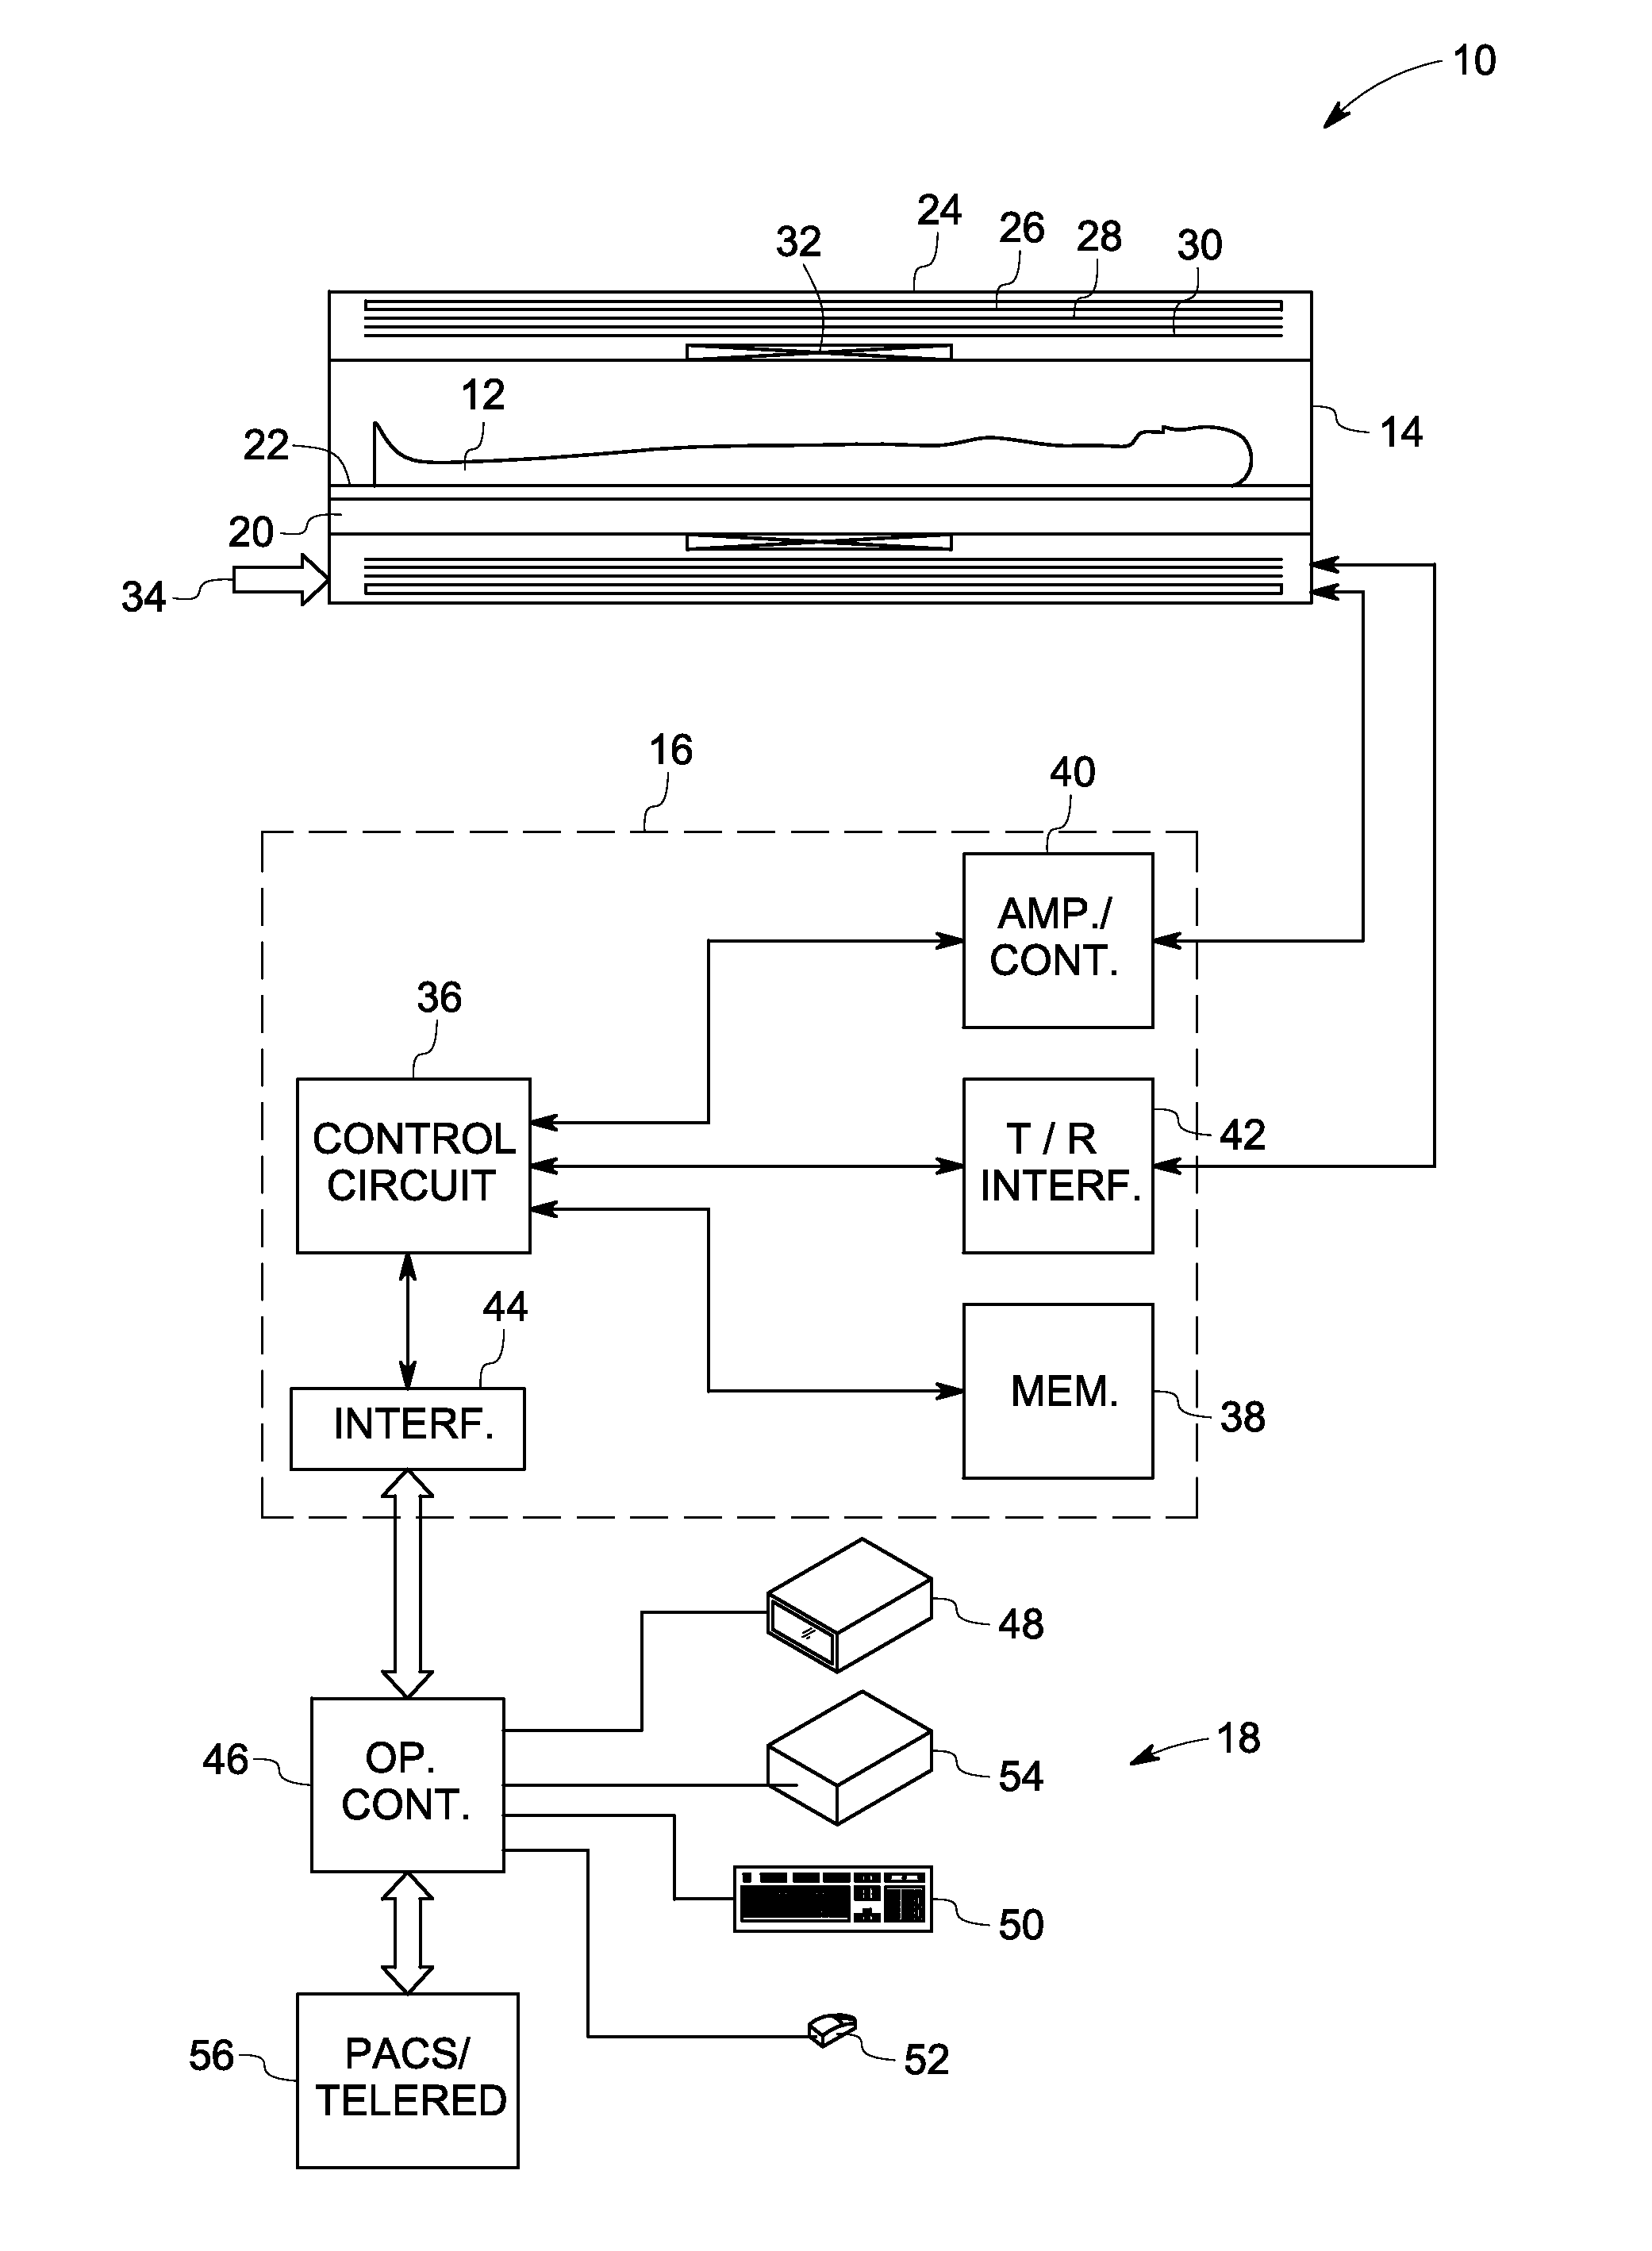 System and method for inductively communicating data